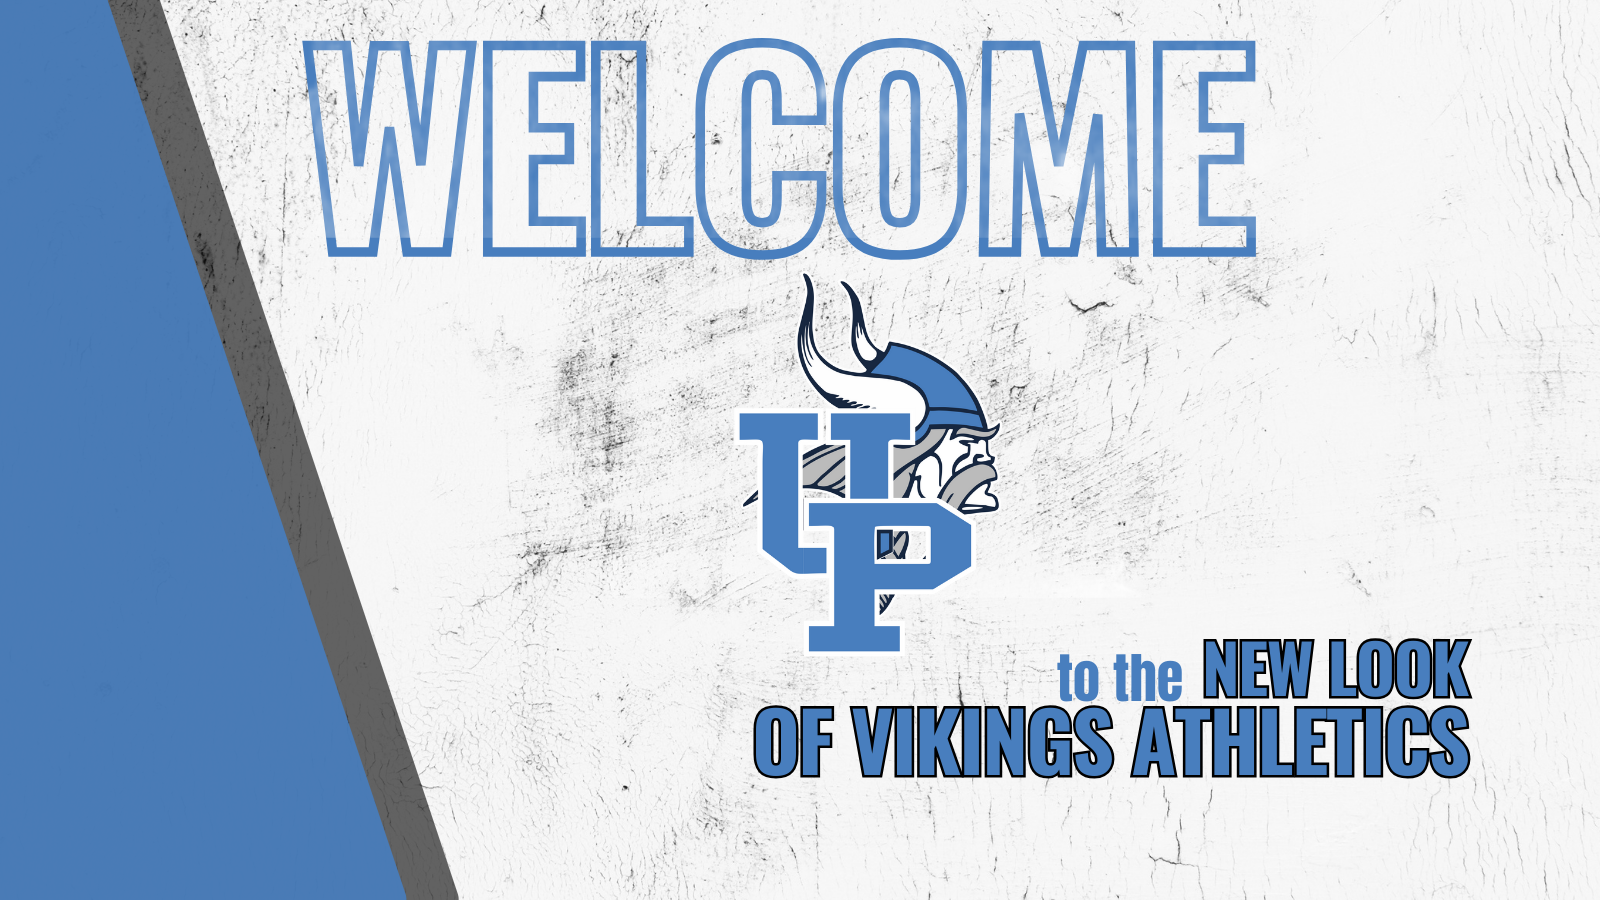 1709829606_CopyofOleyValleyWelcometo1280x320pxTwitterPost14.png - Image for Exciting News for Vikings Athletics!